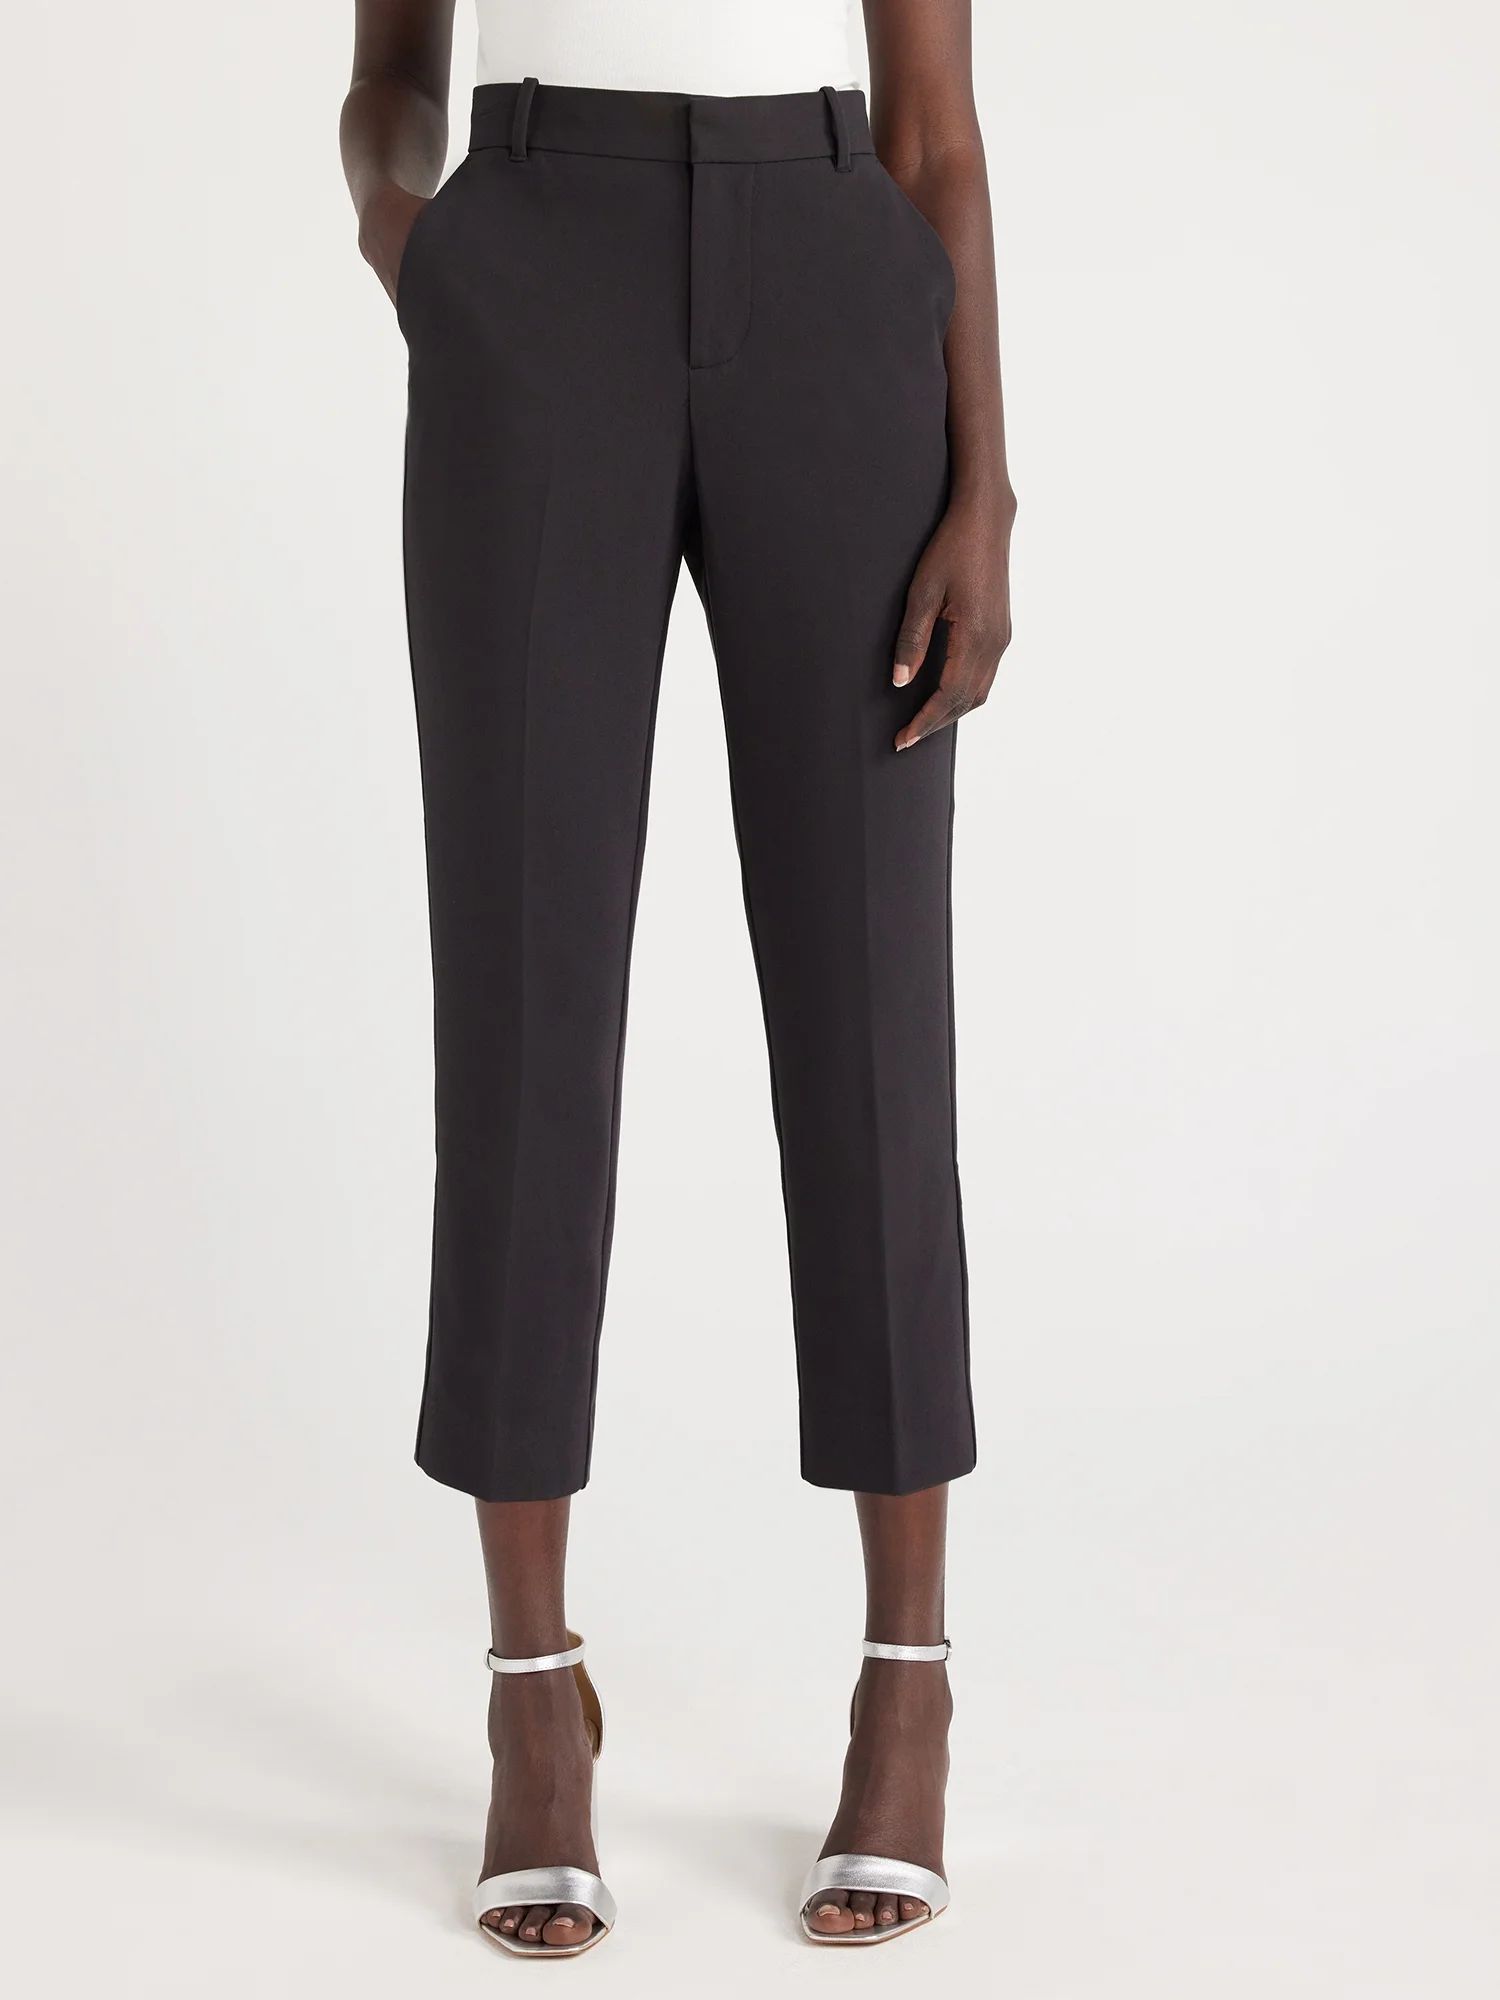 Free Assembly Women’s Mid Rise Slim Tailored Trousers, 26” Inseam, Sizes 0-20 | Walmart (US)